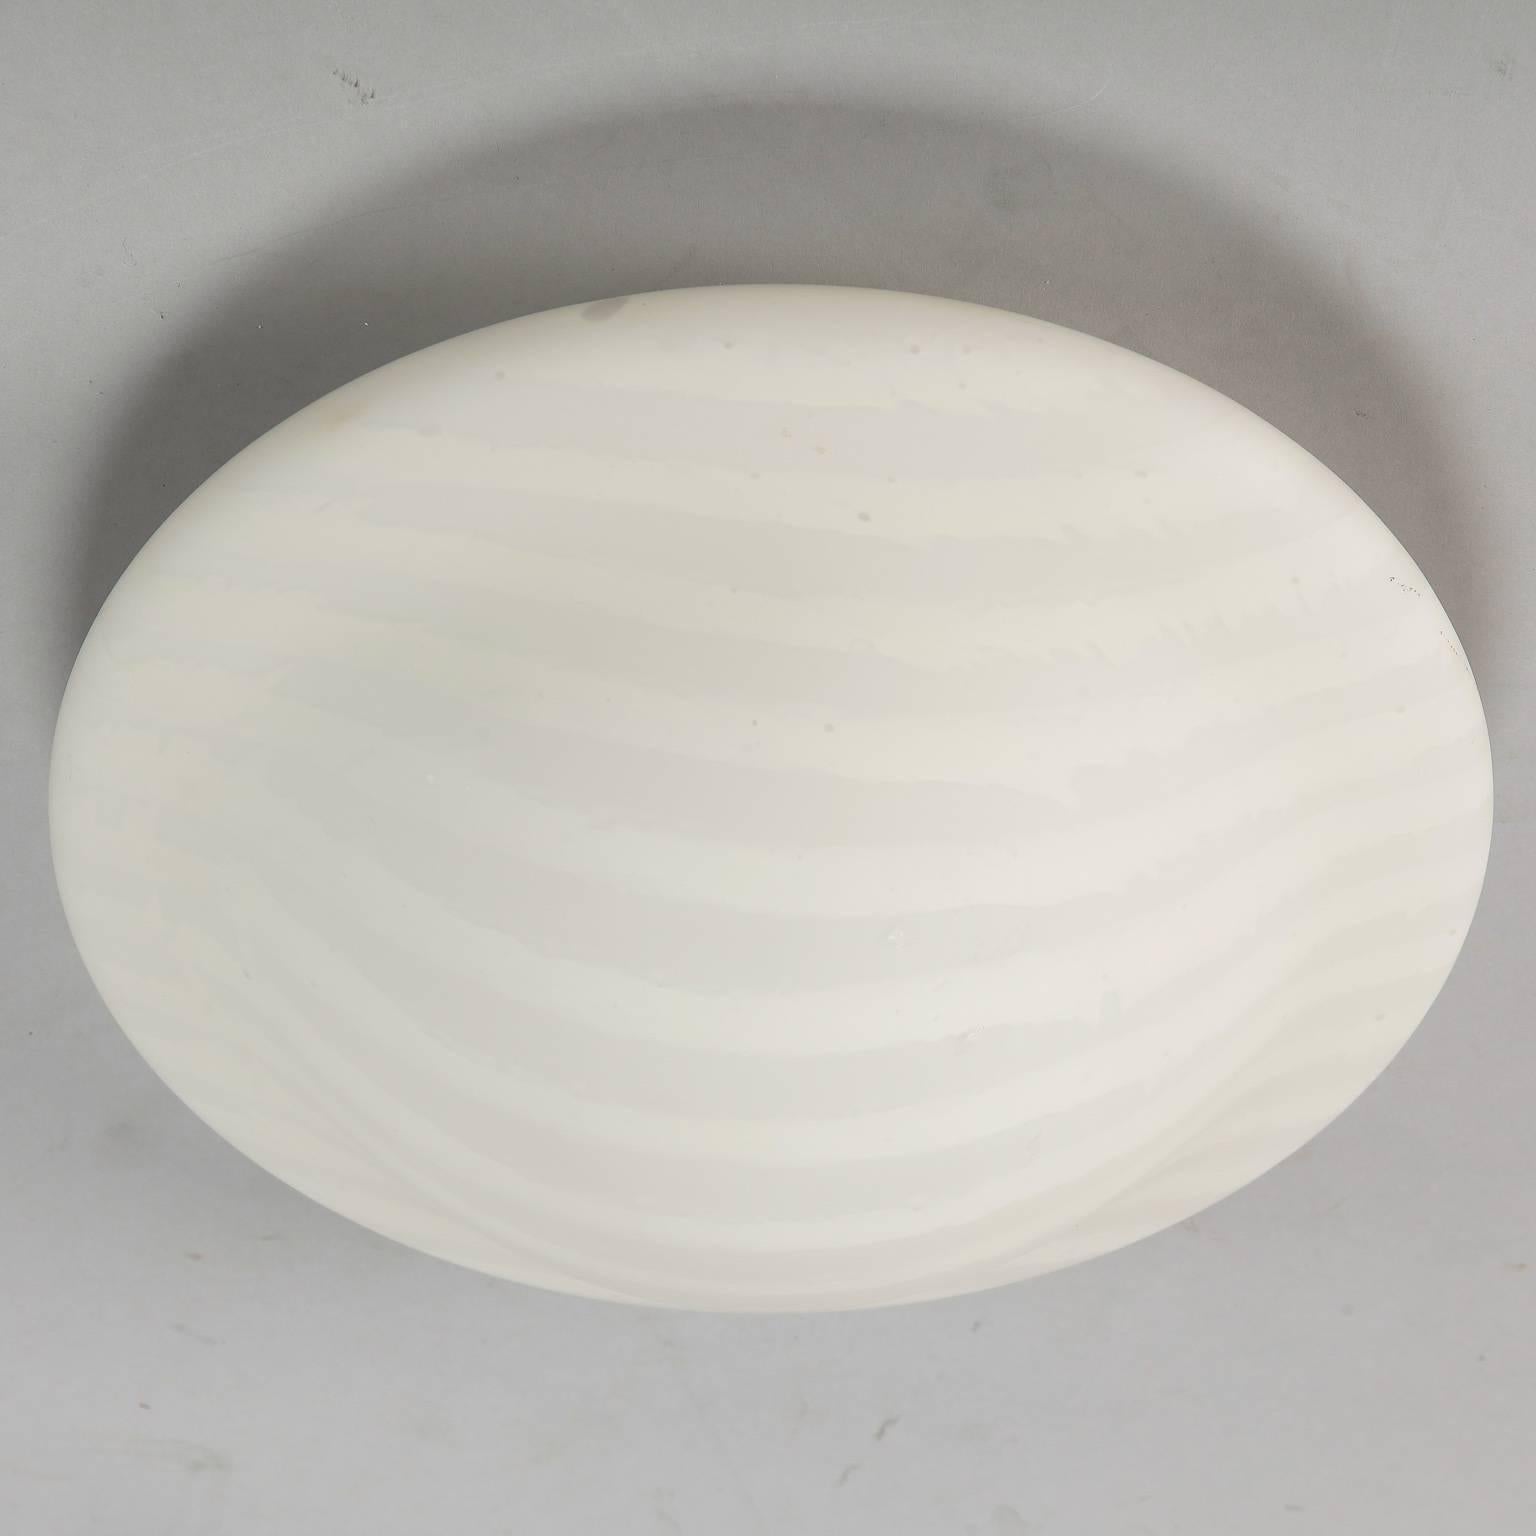 Round white on white striped satin glass flush mount light fixture attributed to German maker Peill and Putzler. New wiring for US electrical standards, circa 1950s.